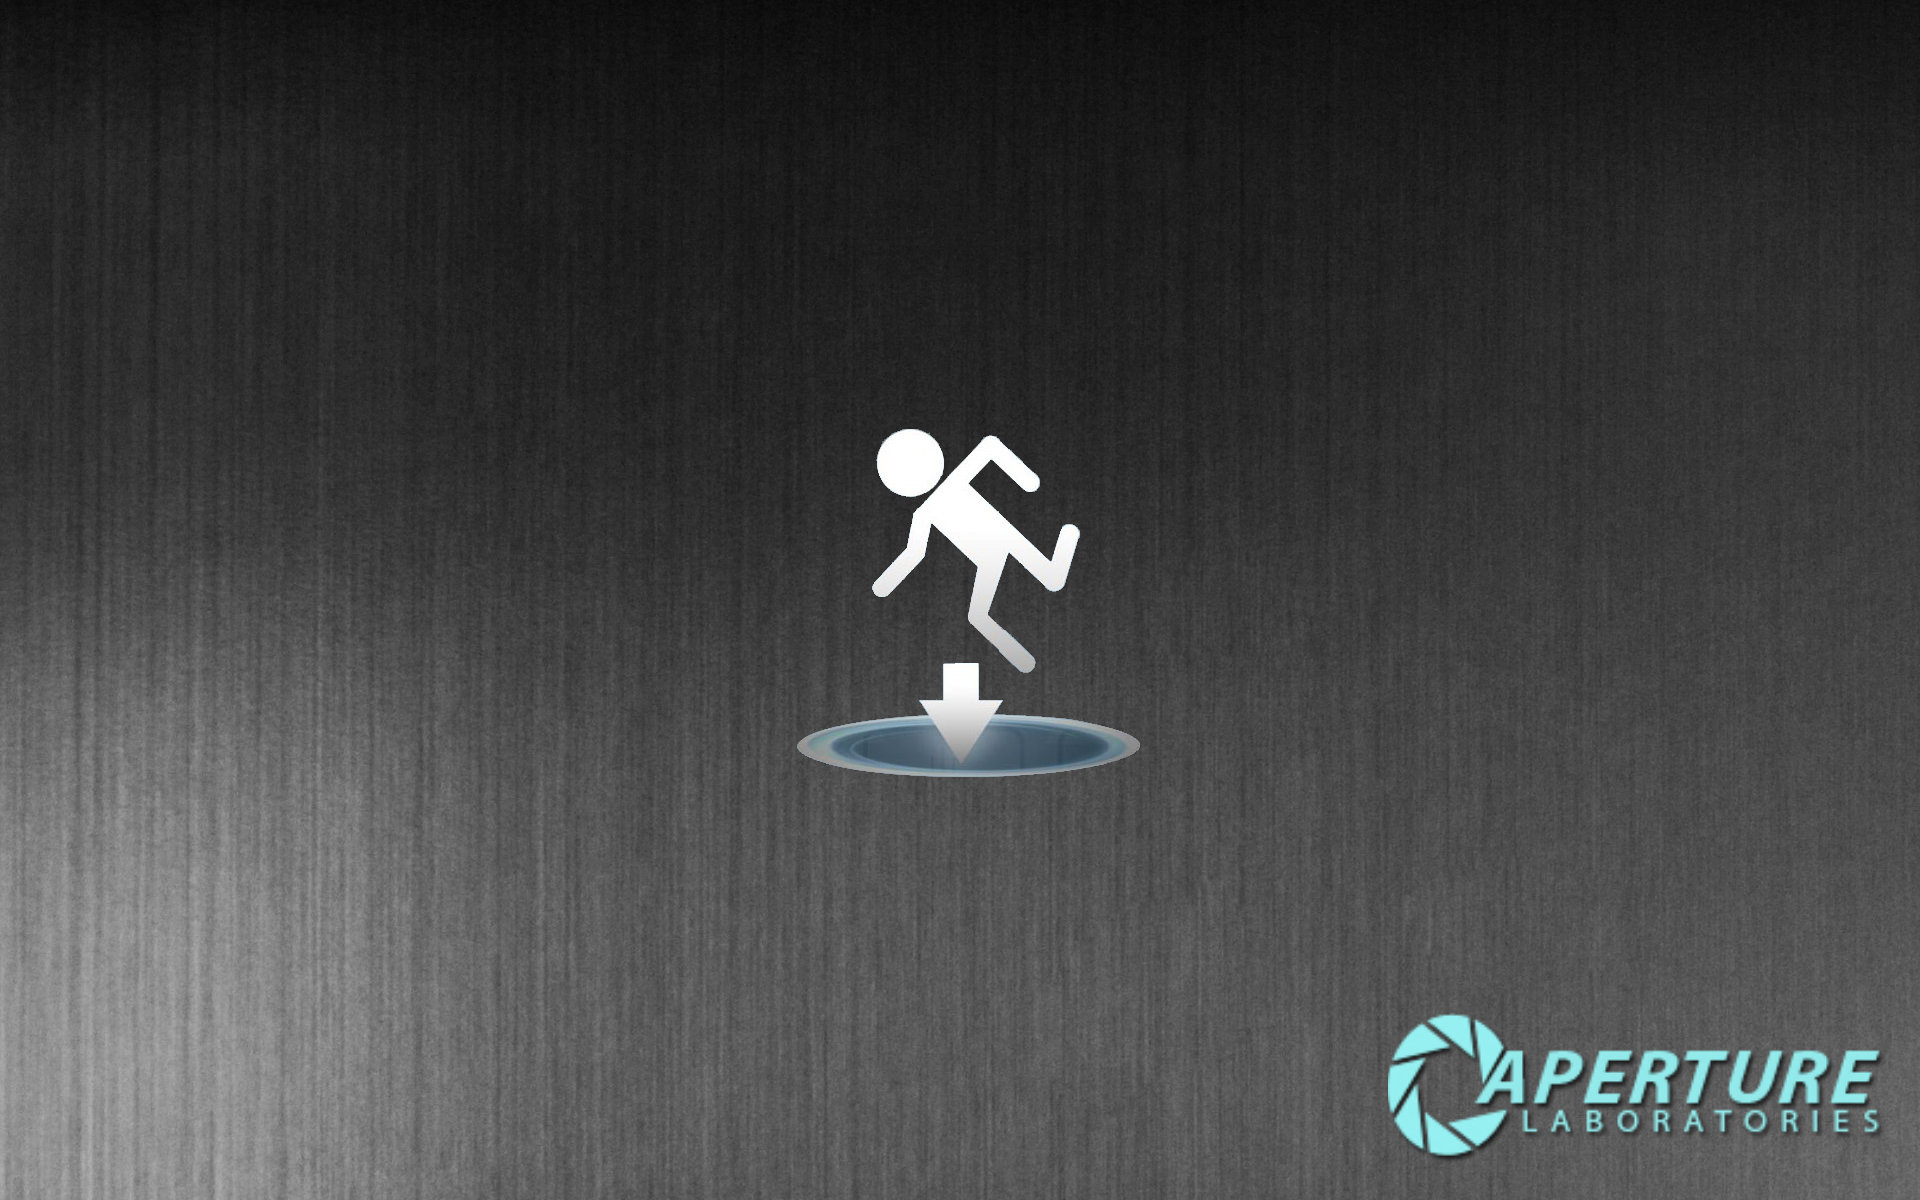 aperture science wallpaper 4 by robcoxxy customization wallpaper hdtv 1920x1200